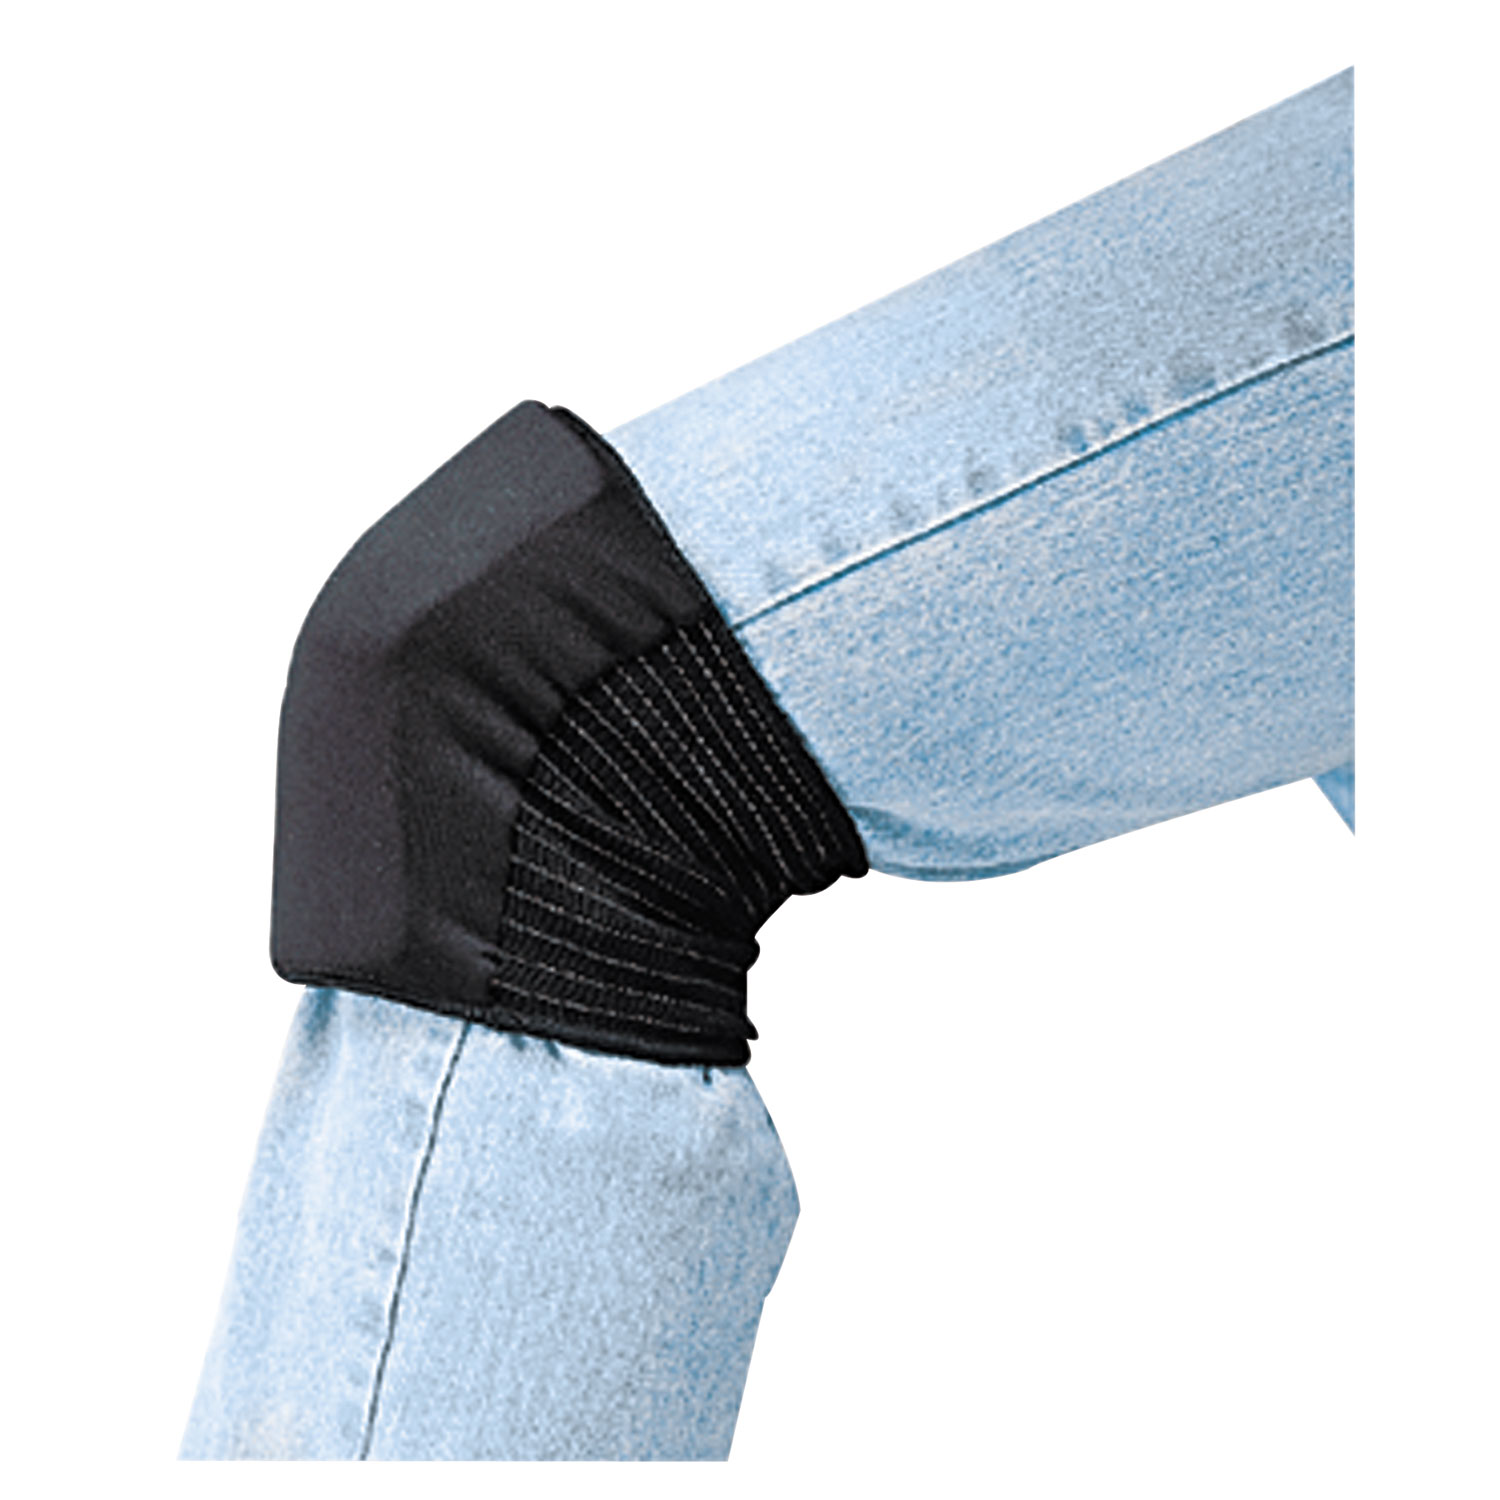 SoftKnees Knee Pads, One Size Fits All